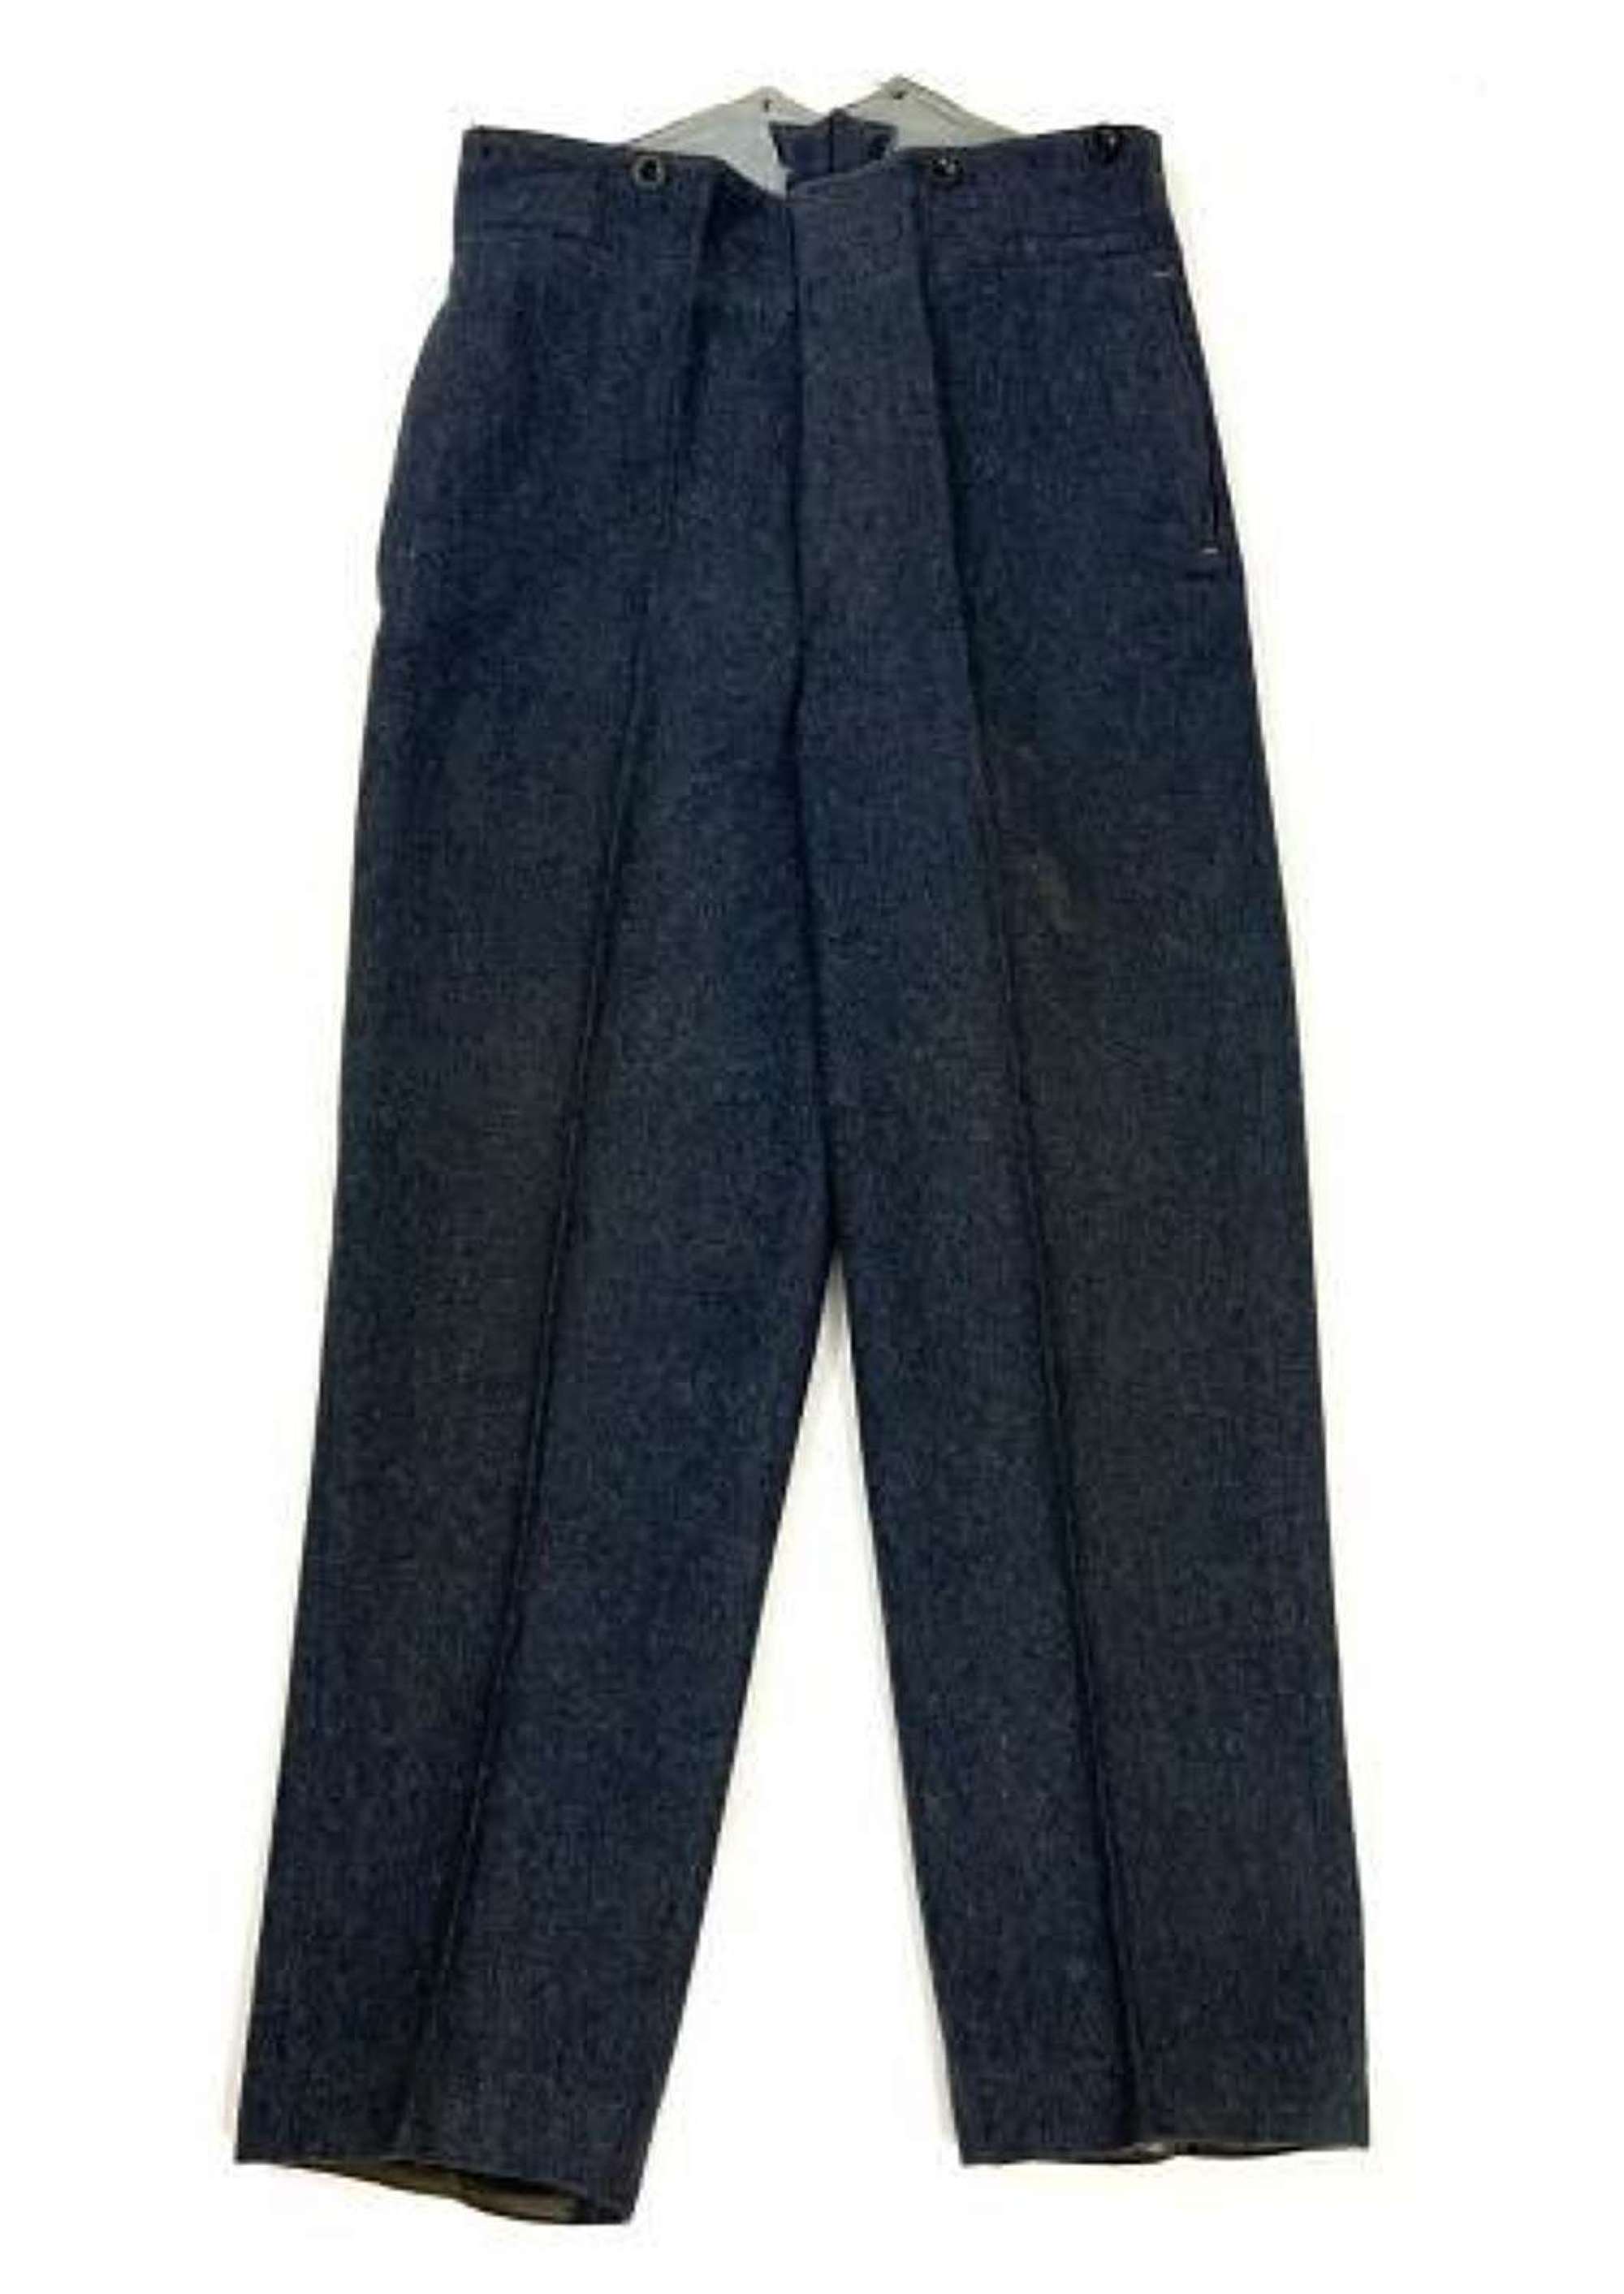 Original 1950 Dated RAF Ordinary Airman's Trousers - Size No. 11